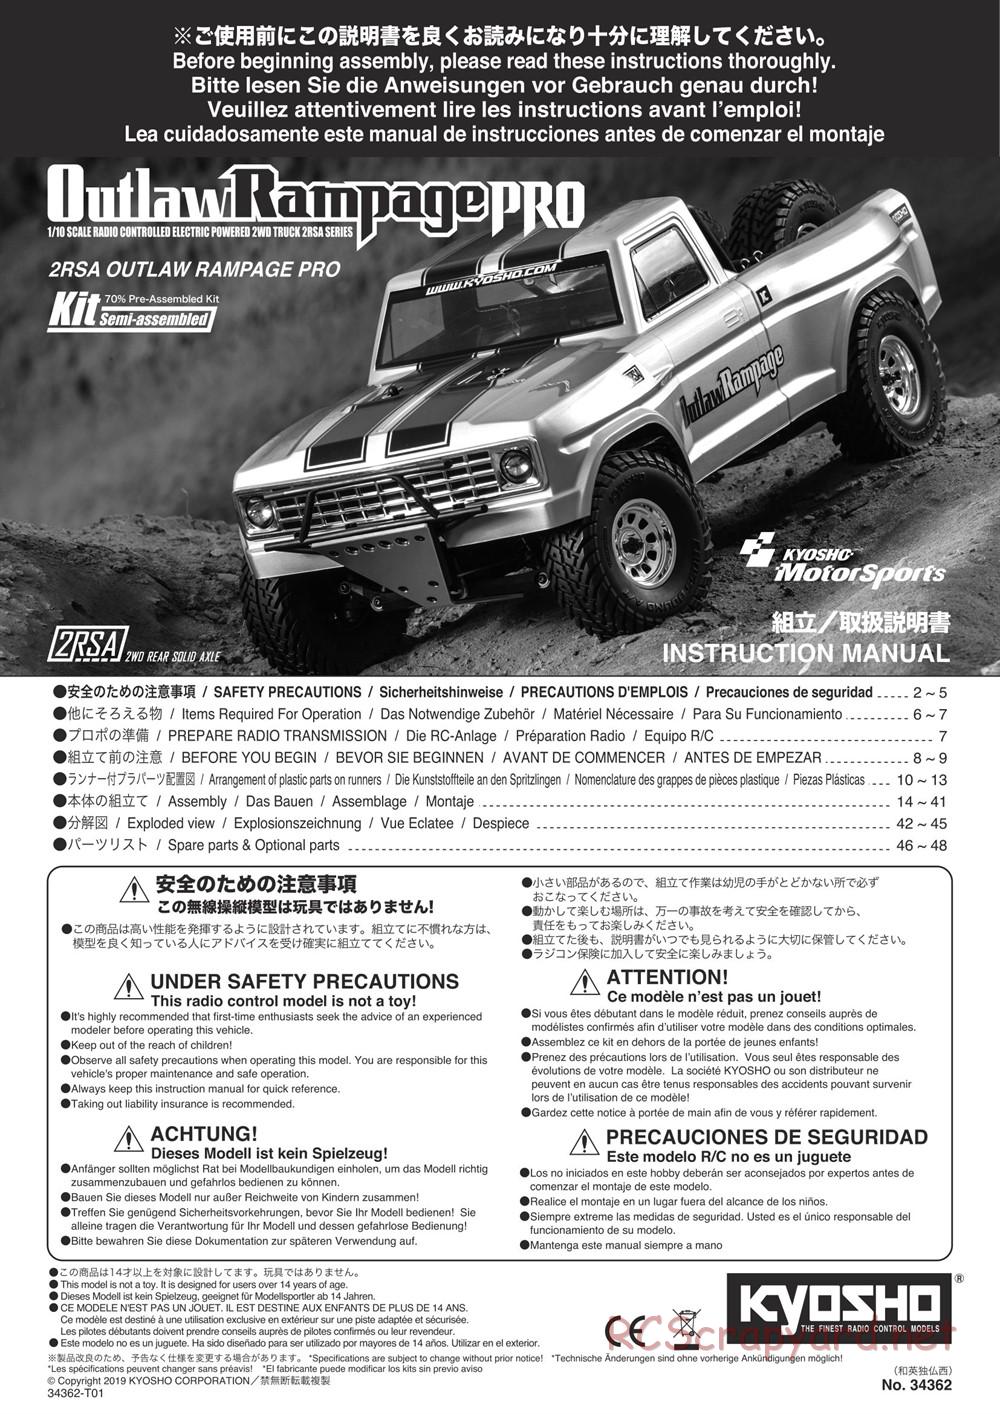 Kyosho - Outlaw Rampage Pro - Manual - Page 1